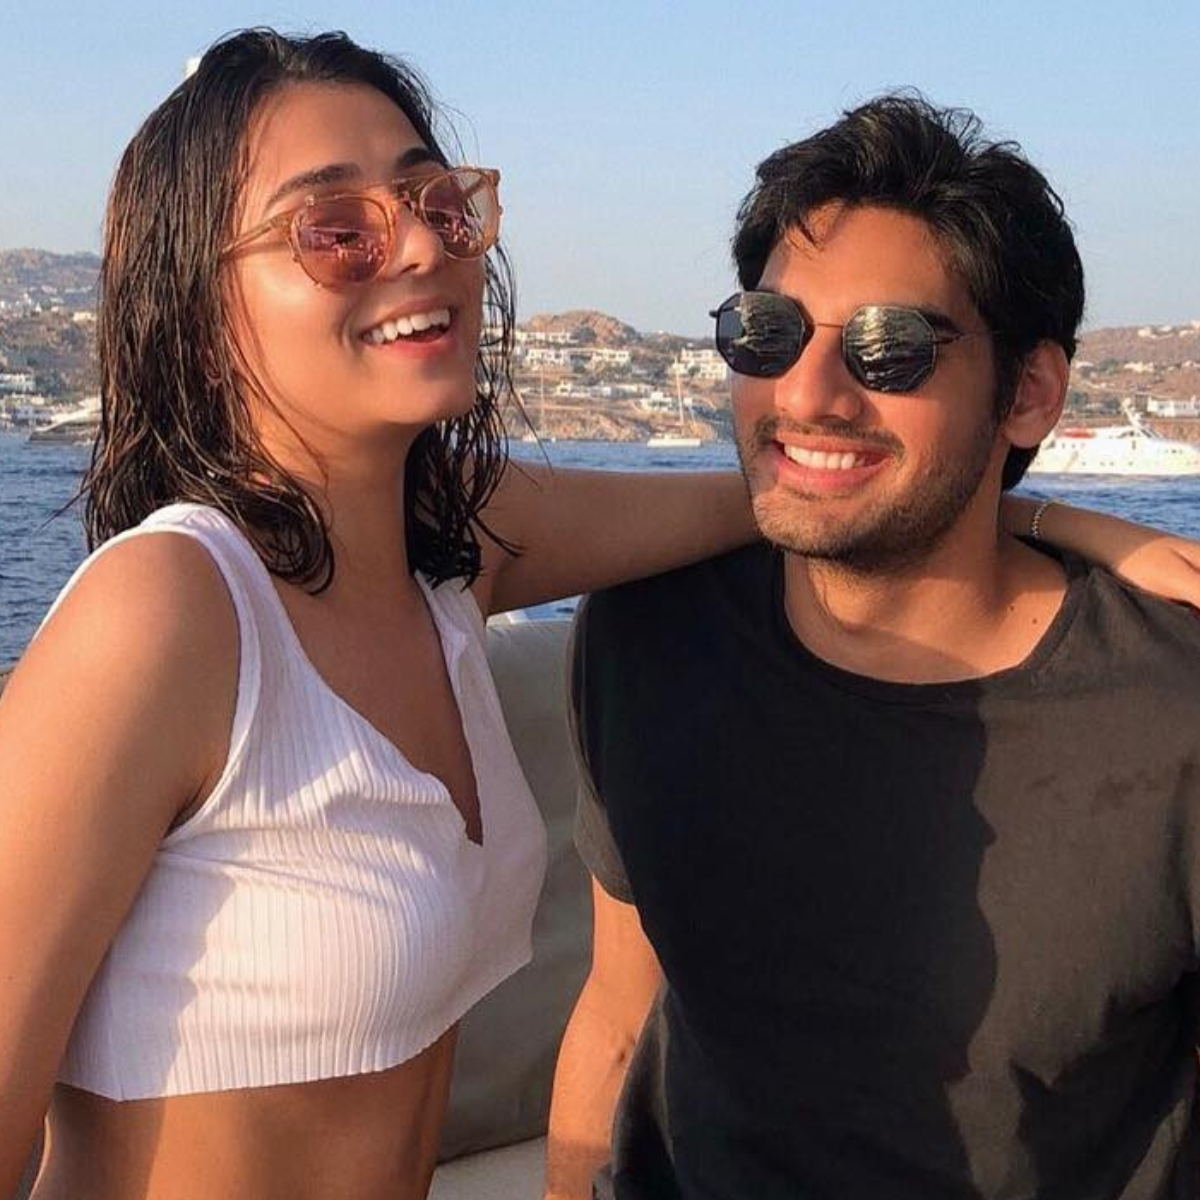 EXCLUSIVE: Ahan Shetty, Tania Shroff NOT tying the knot in 2022, actor’s spokesperson squashes wedding rumours